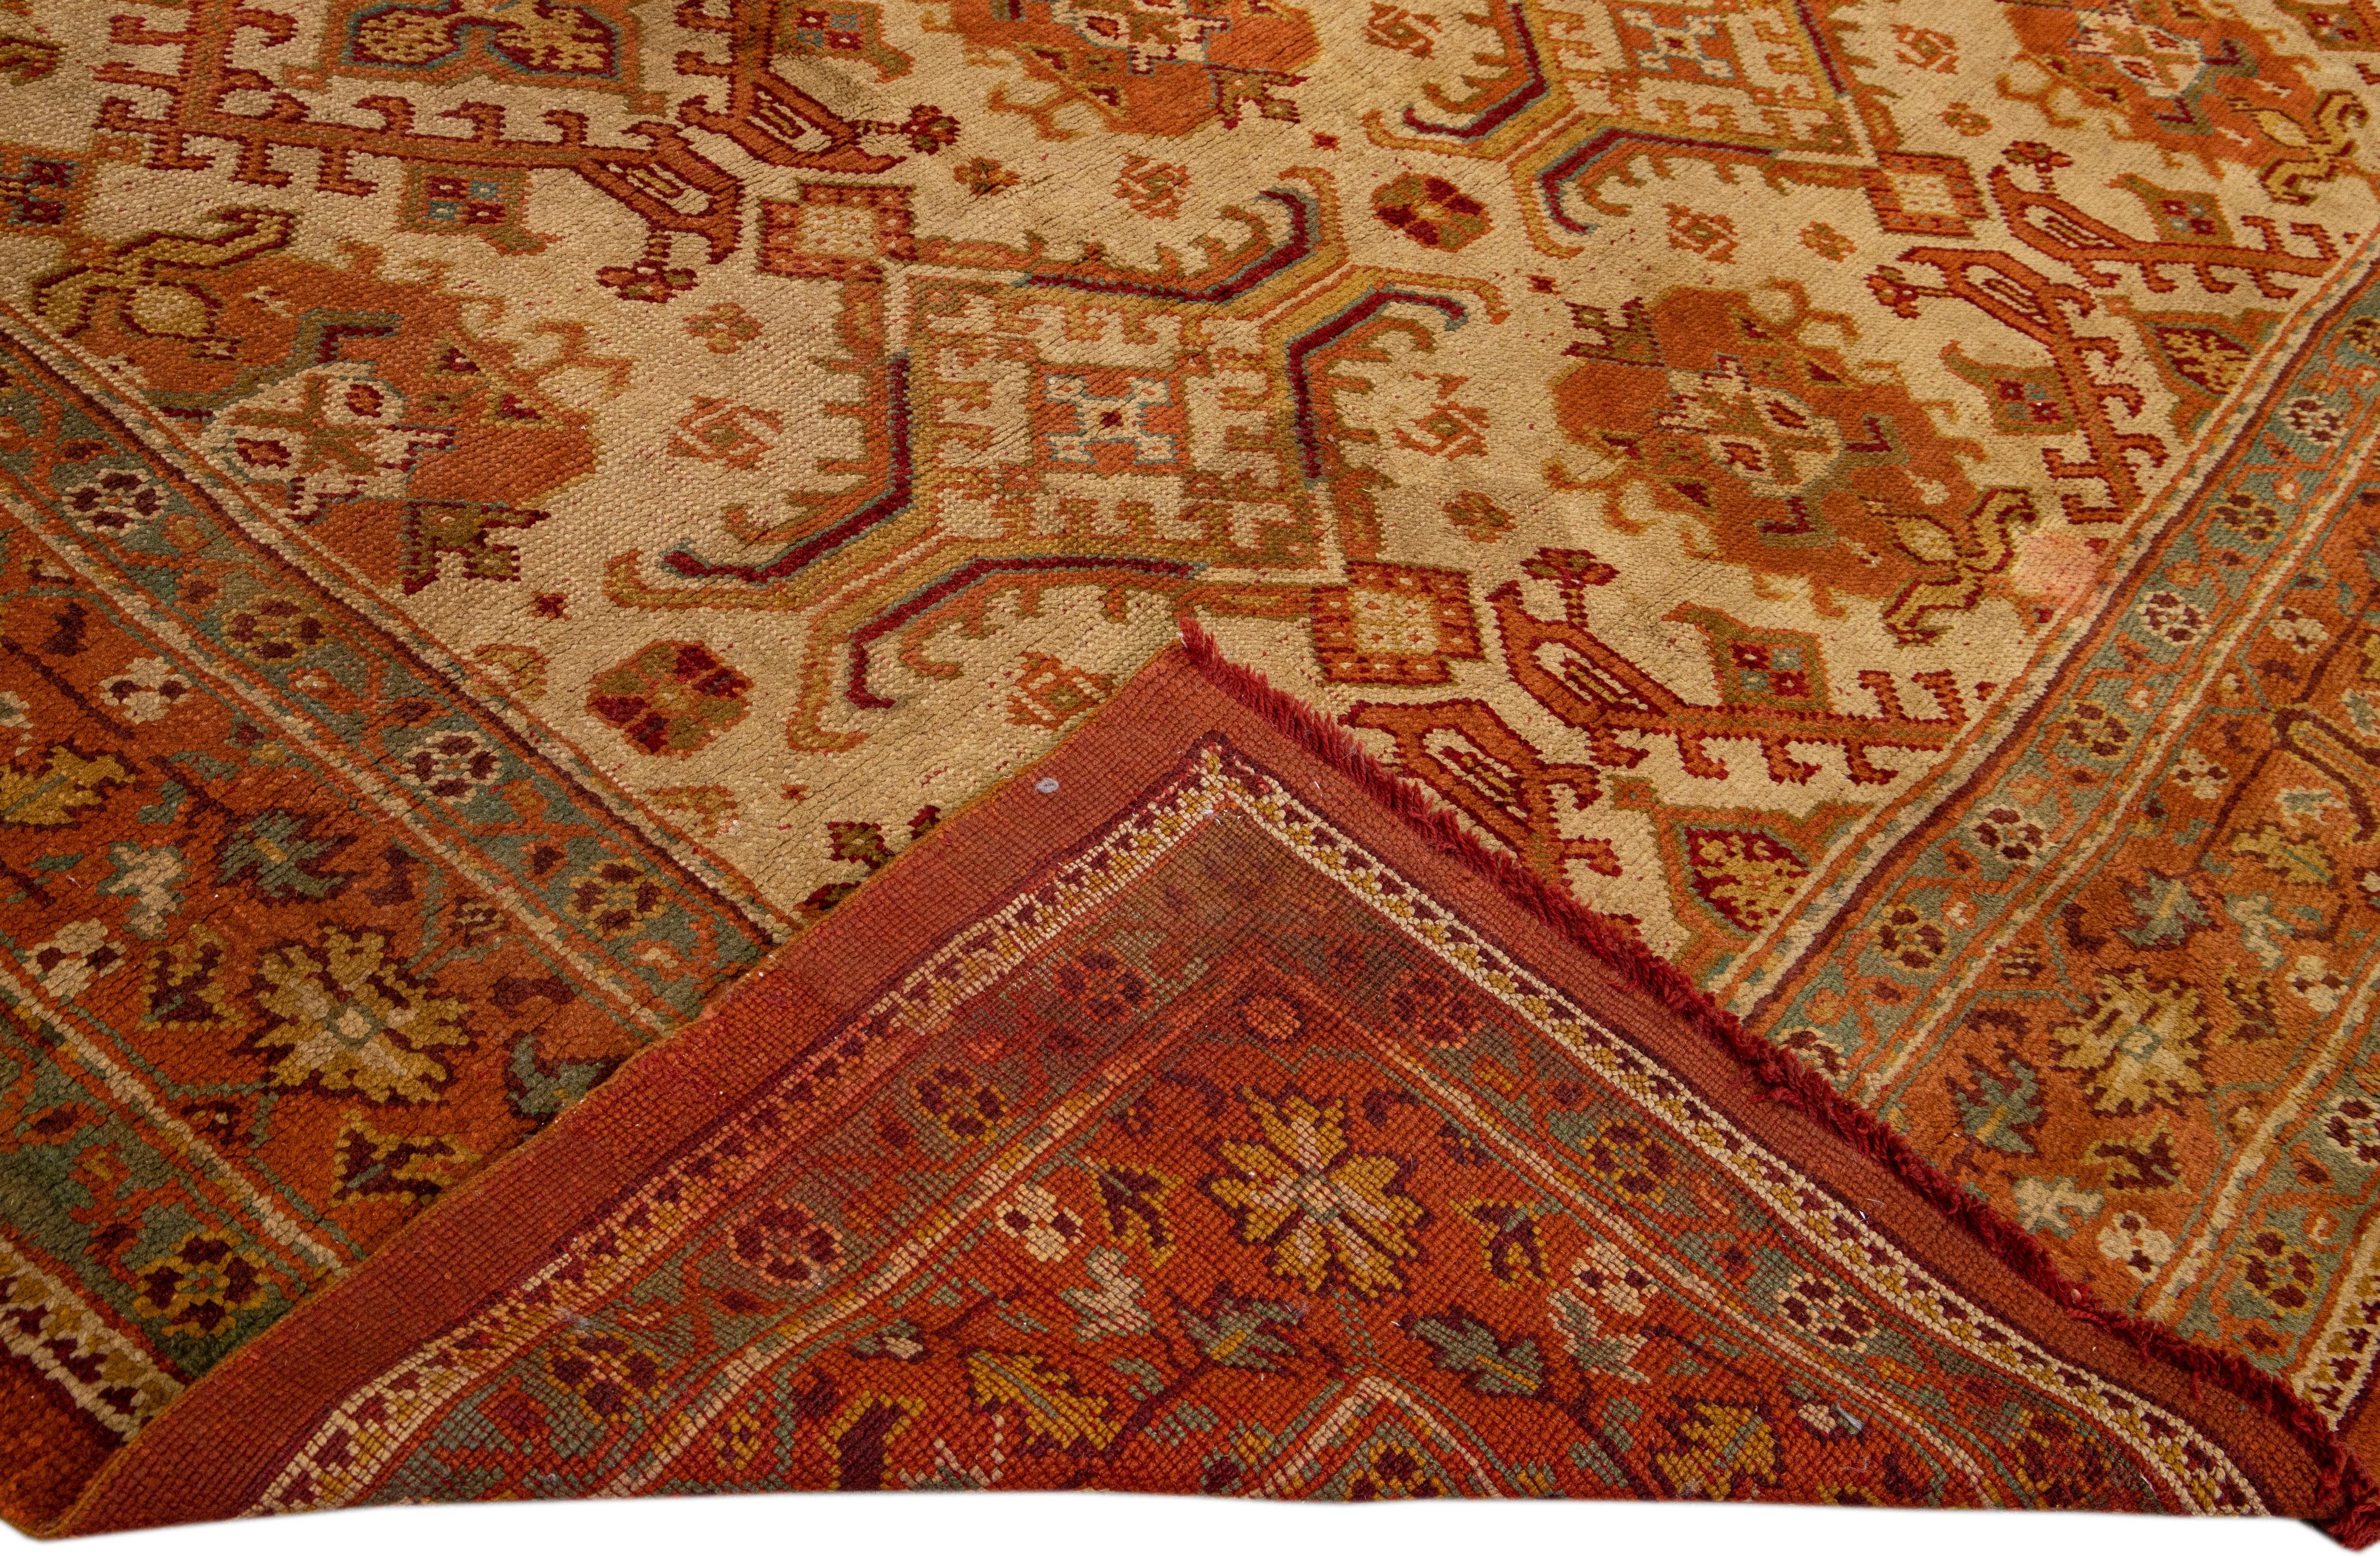 Beautiful Vintage Turkish hand-knotted wool rug with a Tan field. This rug has a designed orange-rust frame with accents of goldenrod and brown in a gorgeous all-over geometric floral design.

This rug measures: 13' x 14'.